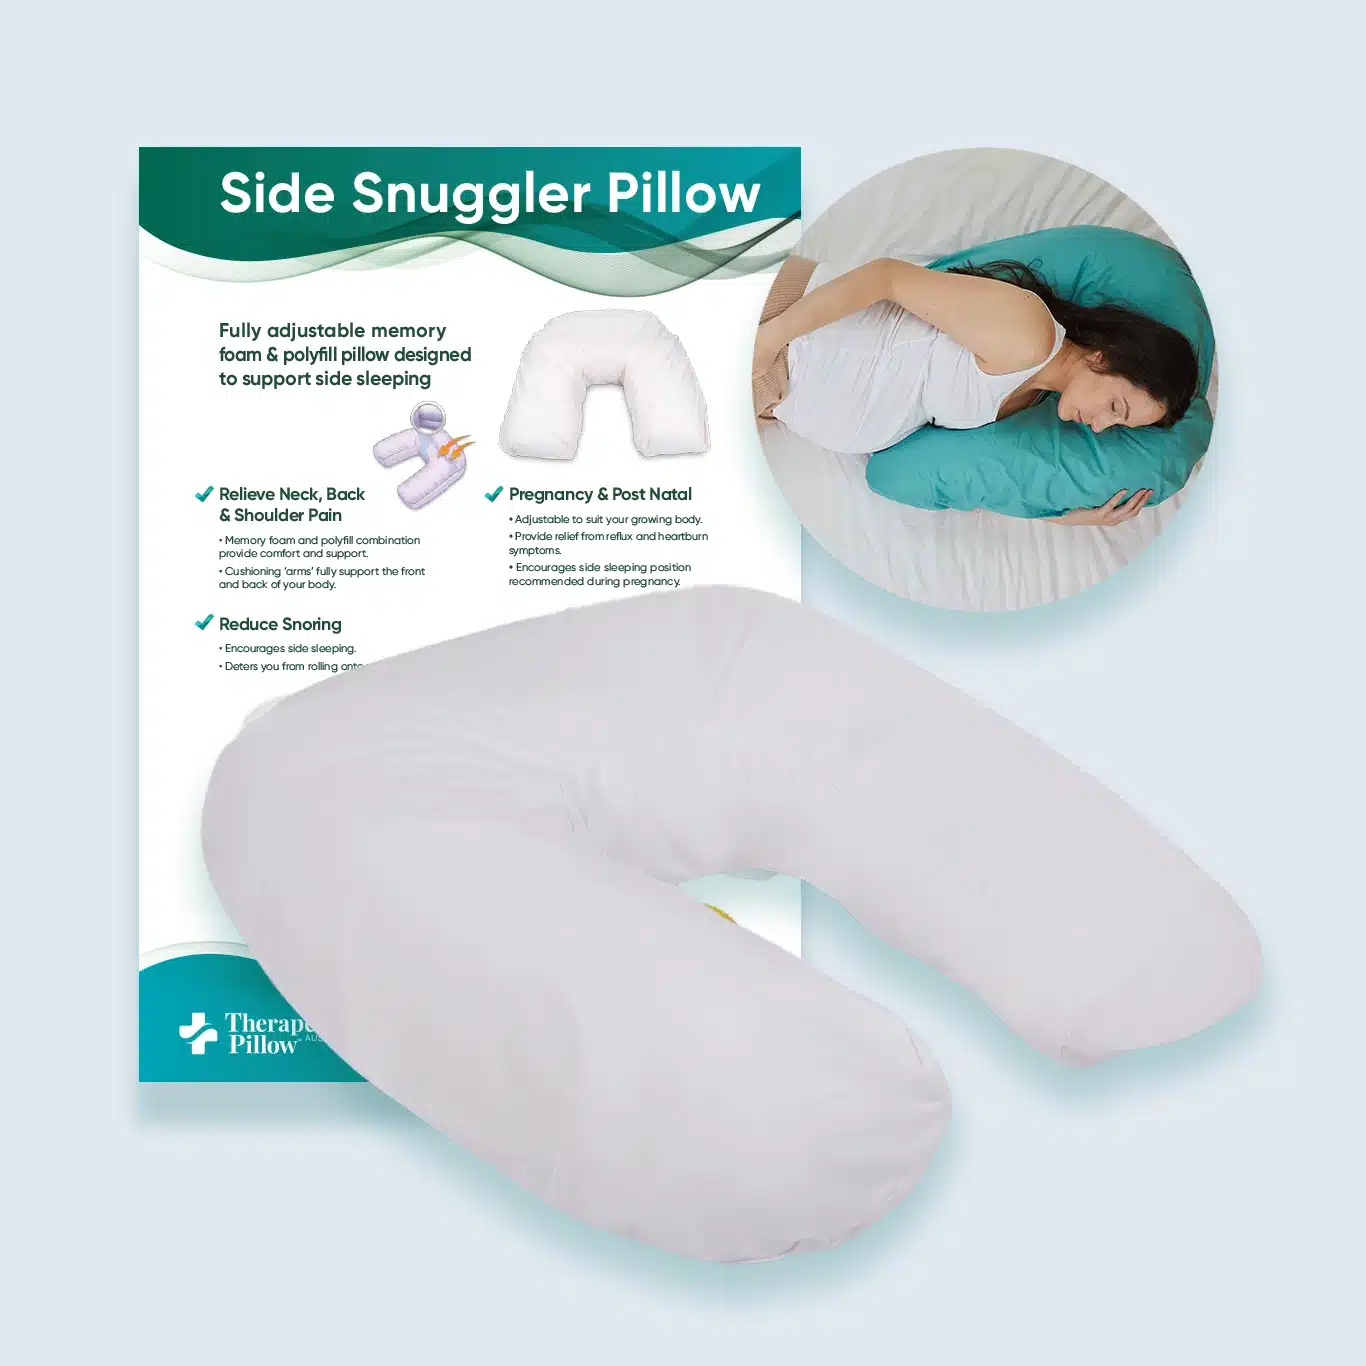 Side Snuggler Pillow, for side sleepers or pregnancy use